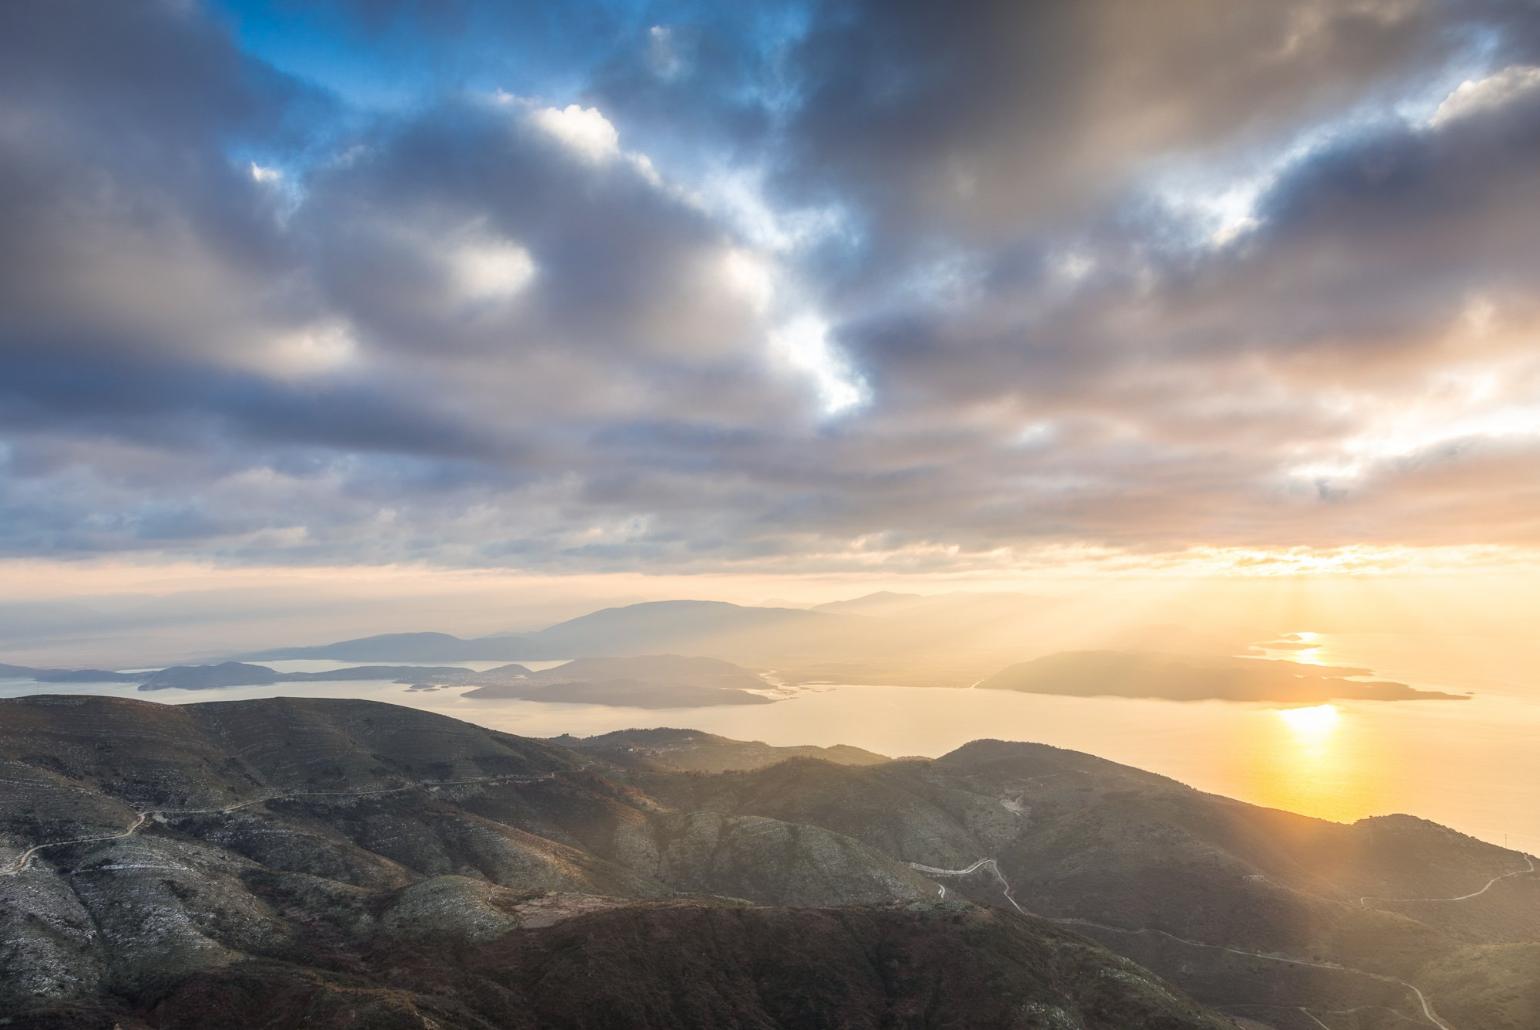 Sunrise from nearby Mount Pantokrator - the highest point on Corfu